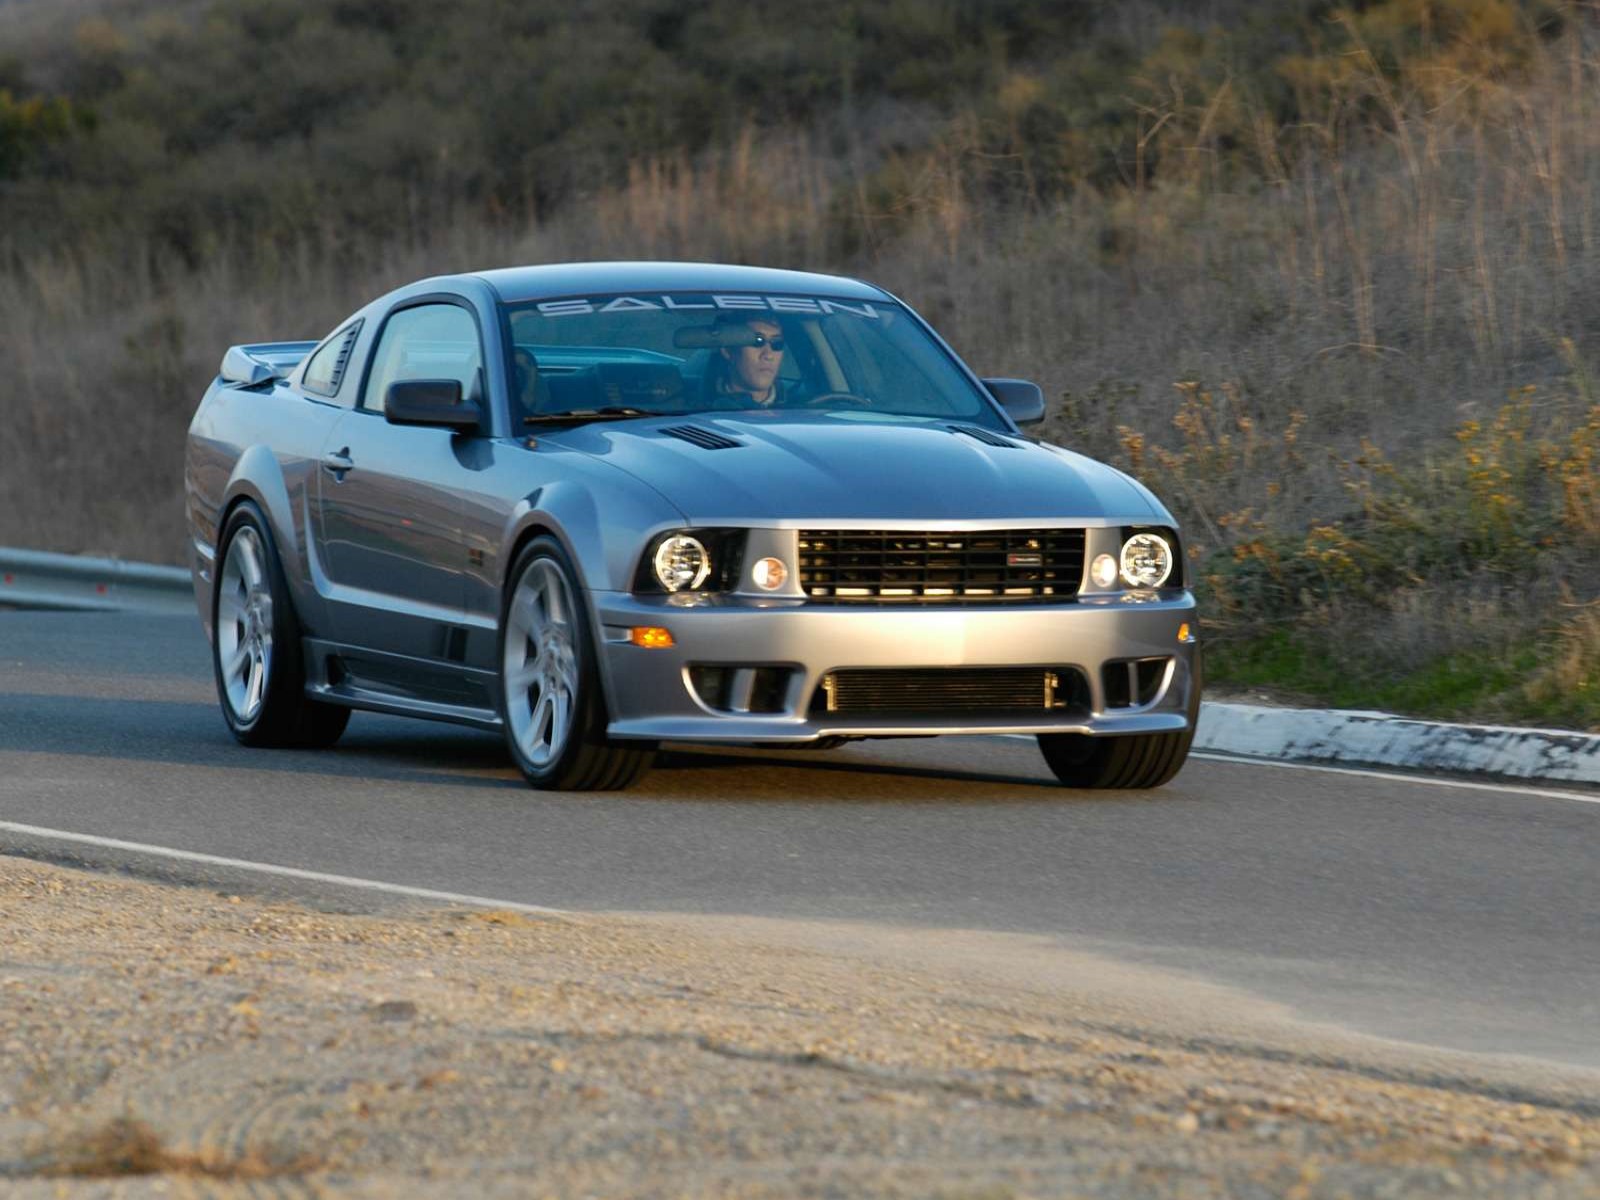 Car Pictures: Saleen Ford Mustang S281 Supercharged 2005